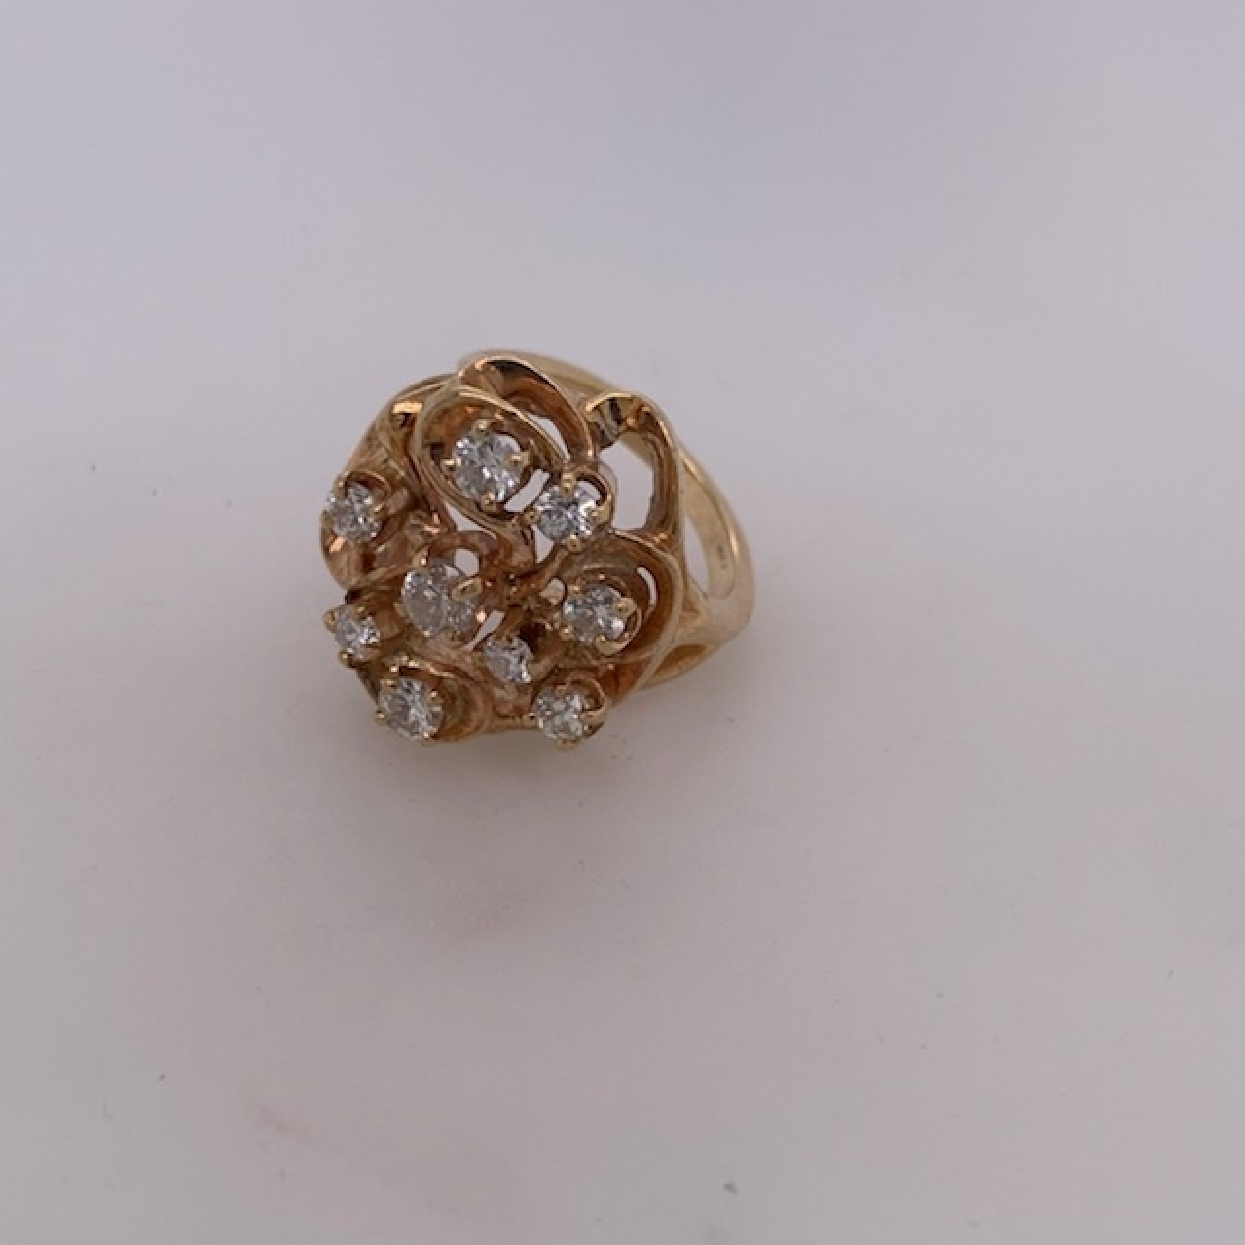 14K Yellow Gold Freeform Ring with Apx. 1.15cttw of Diamond Accents. Circa 1960 s

Size 5.75